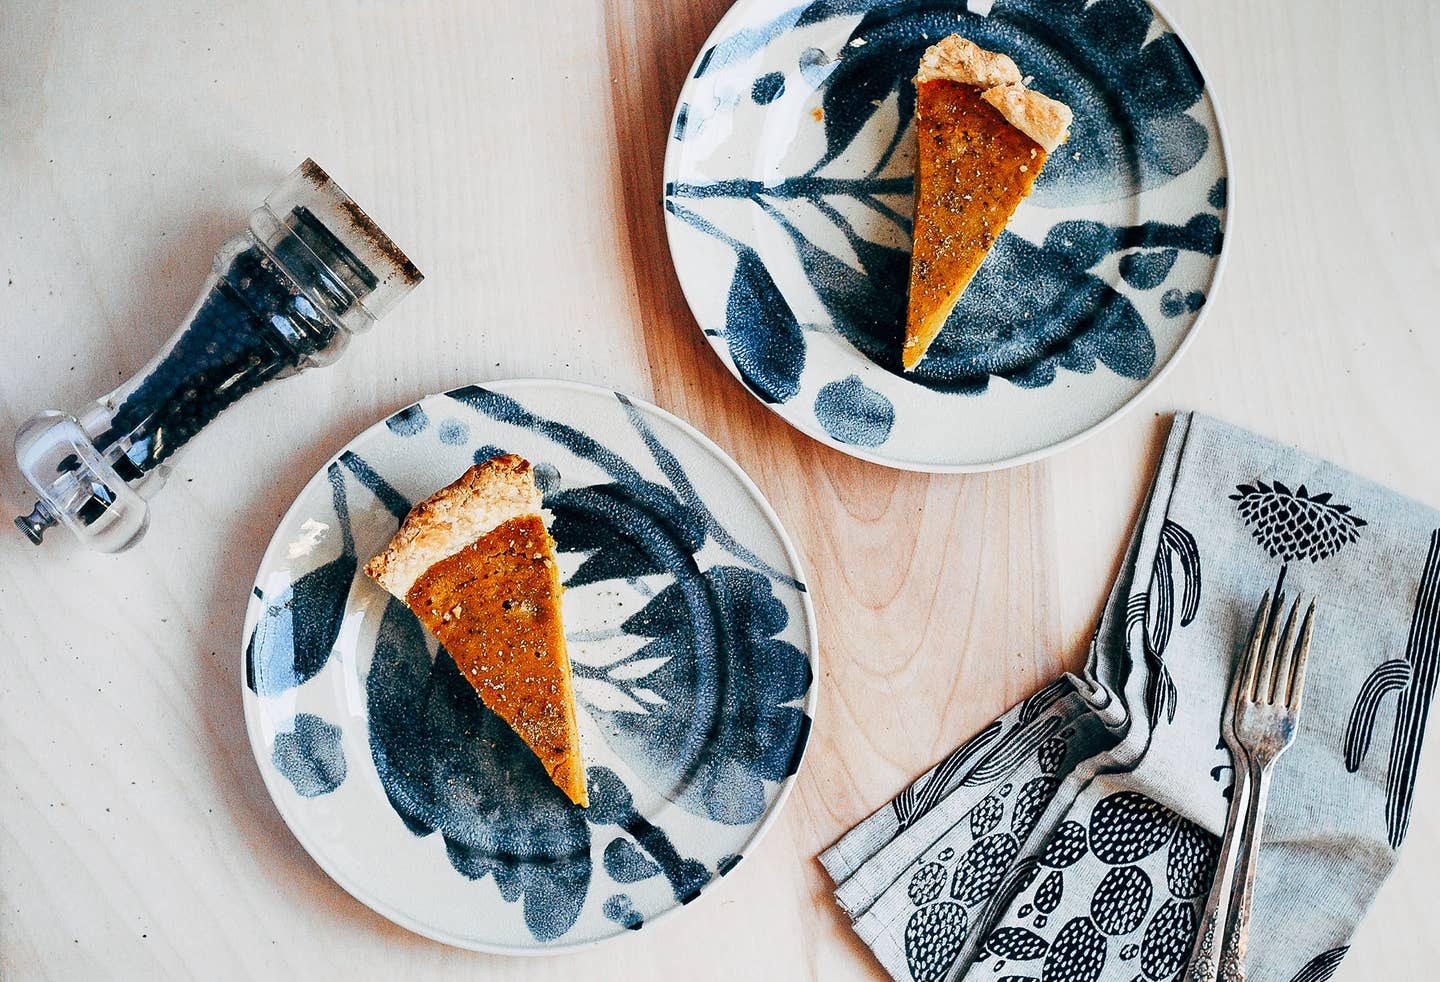 The Sweet and Spicy Better-than-Pumpkin Pie to Make this Thanksgiving